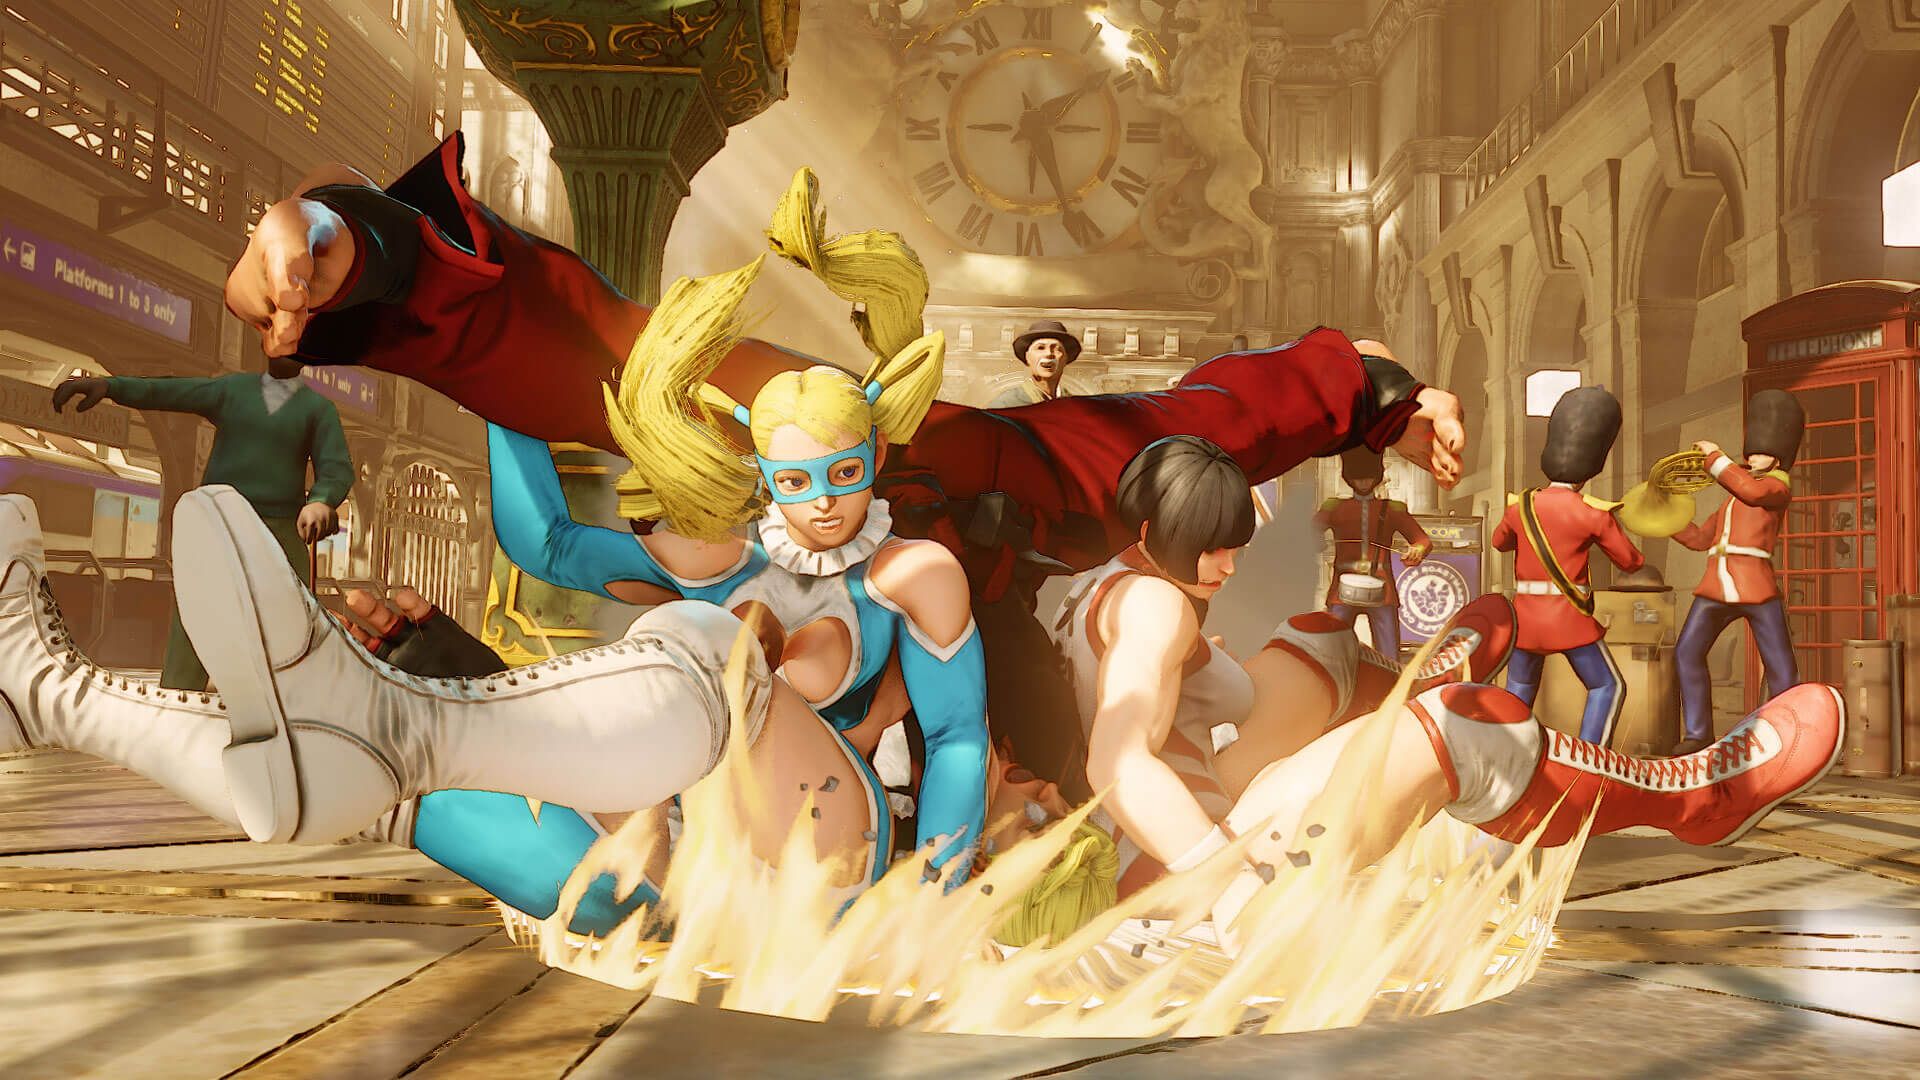 SFV's Final Patch is Here and Capcom Brought the Pain